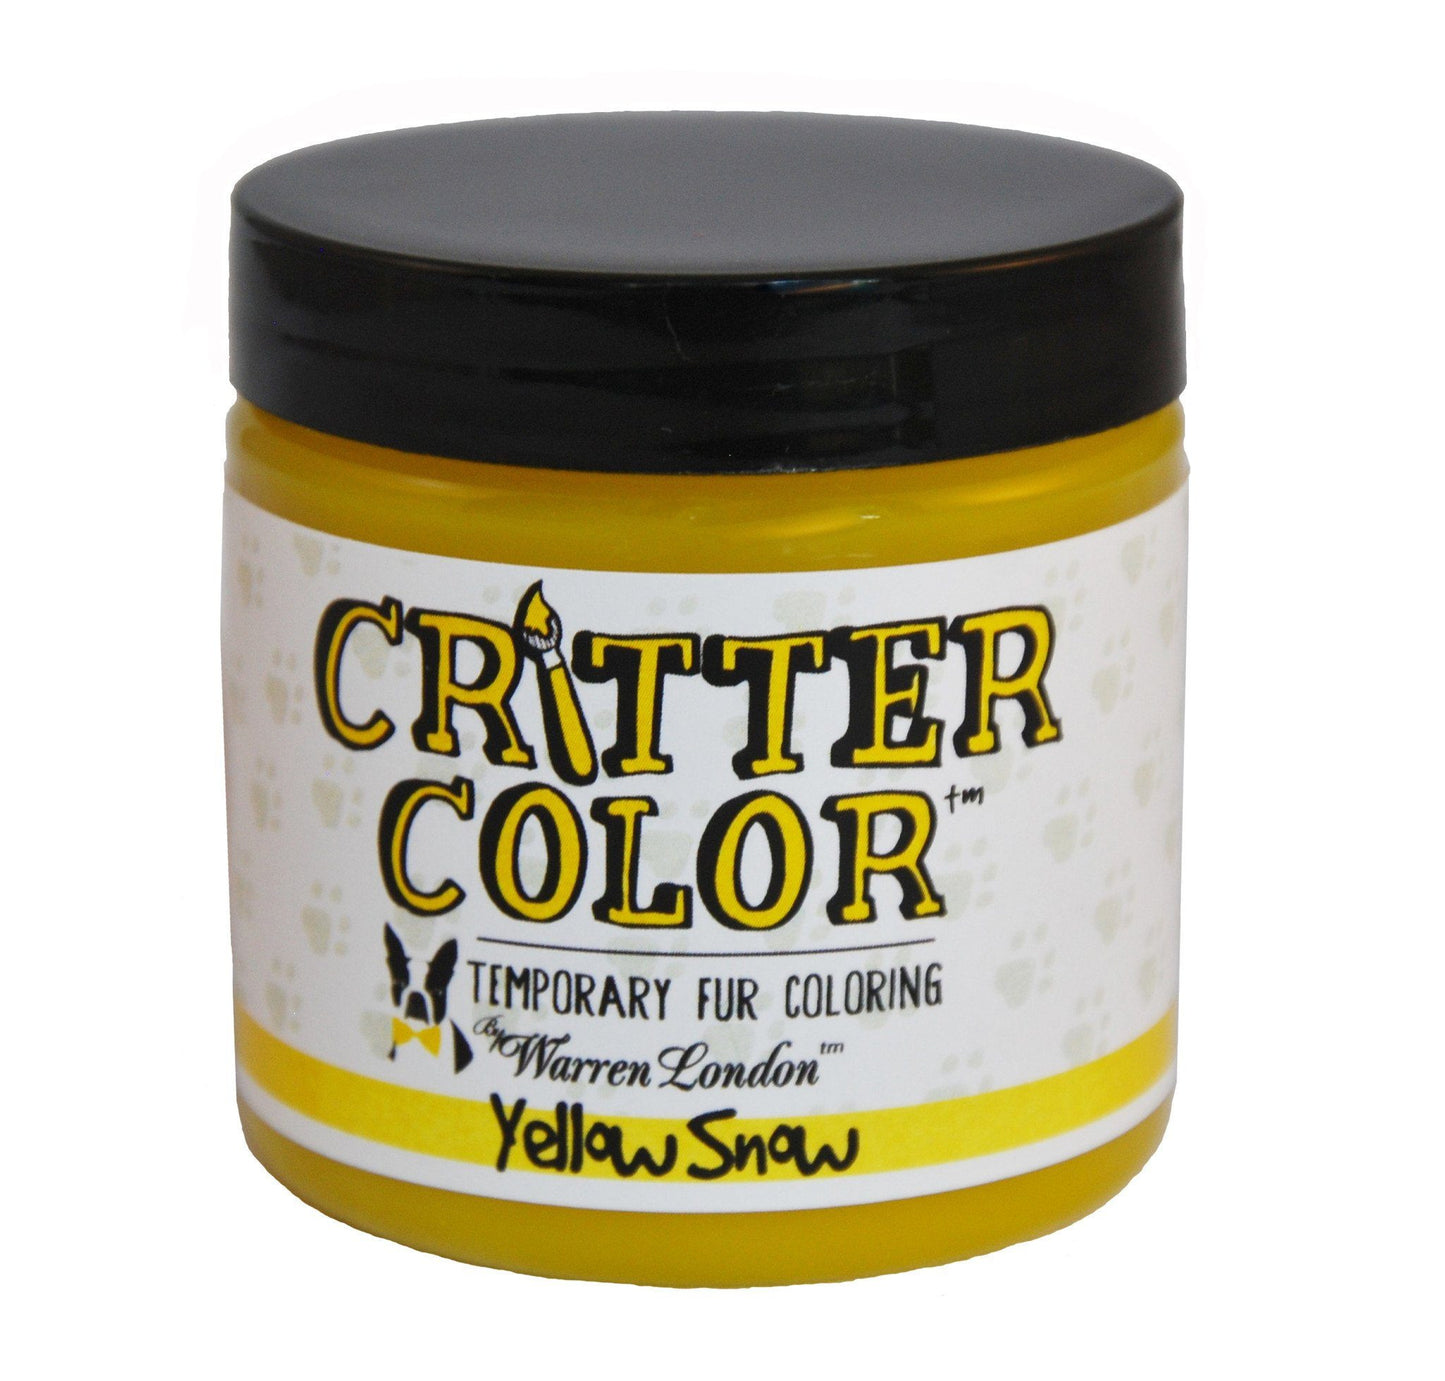 Critter Color - Temporary Pet Fur Coloring/Dog Dye Spa Product Warren London Yellow Snow 